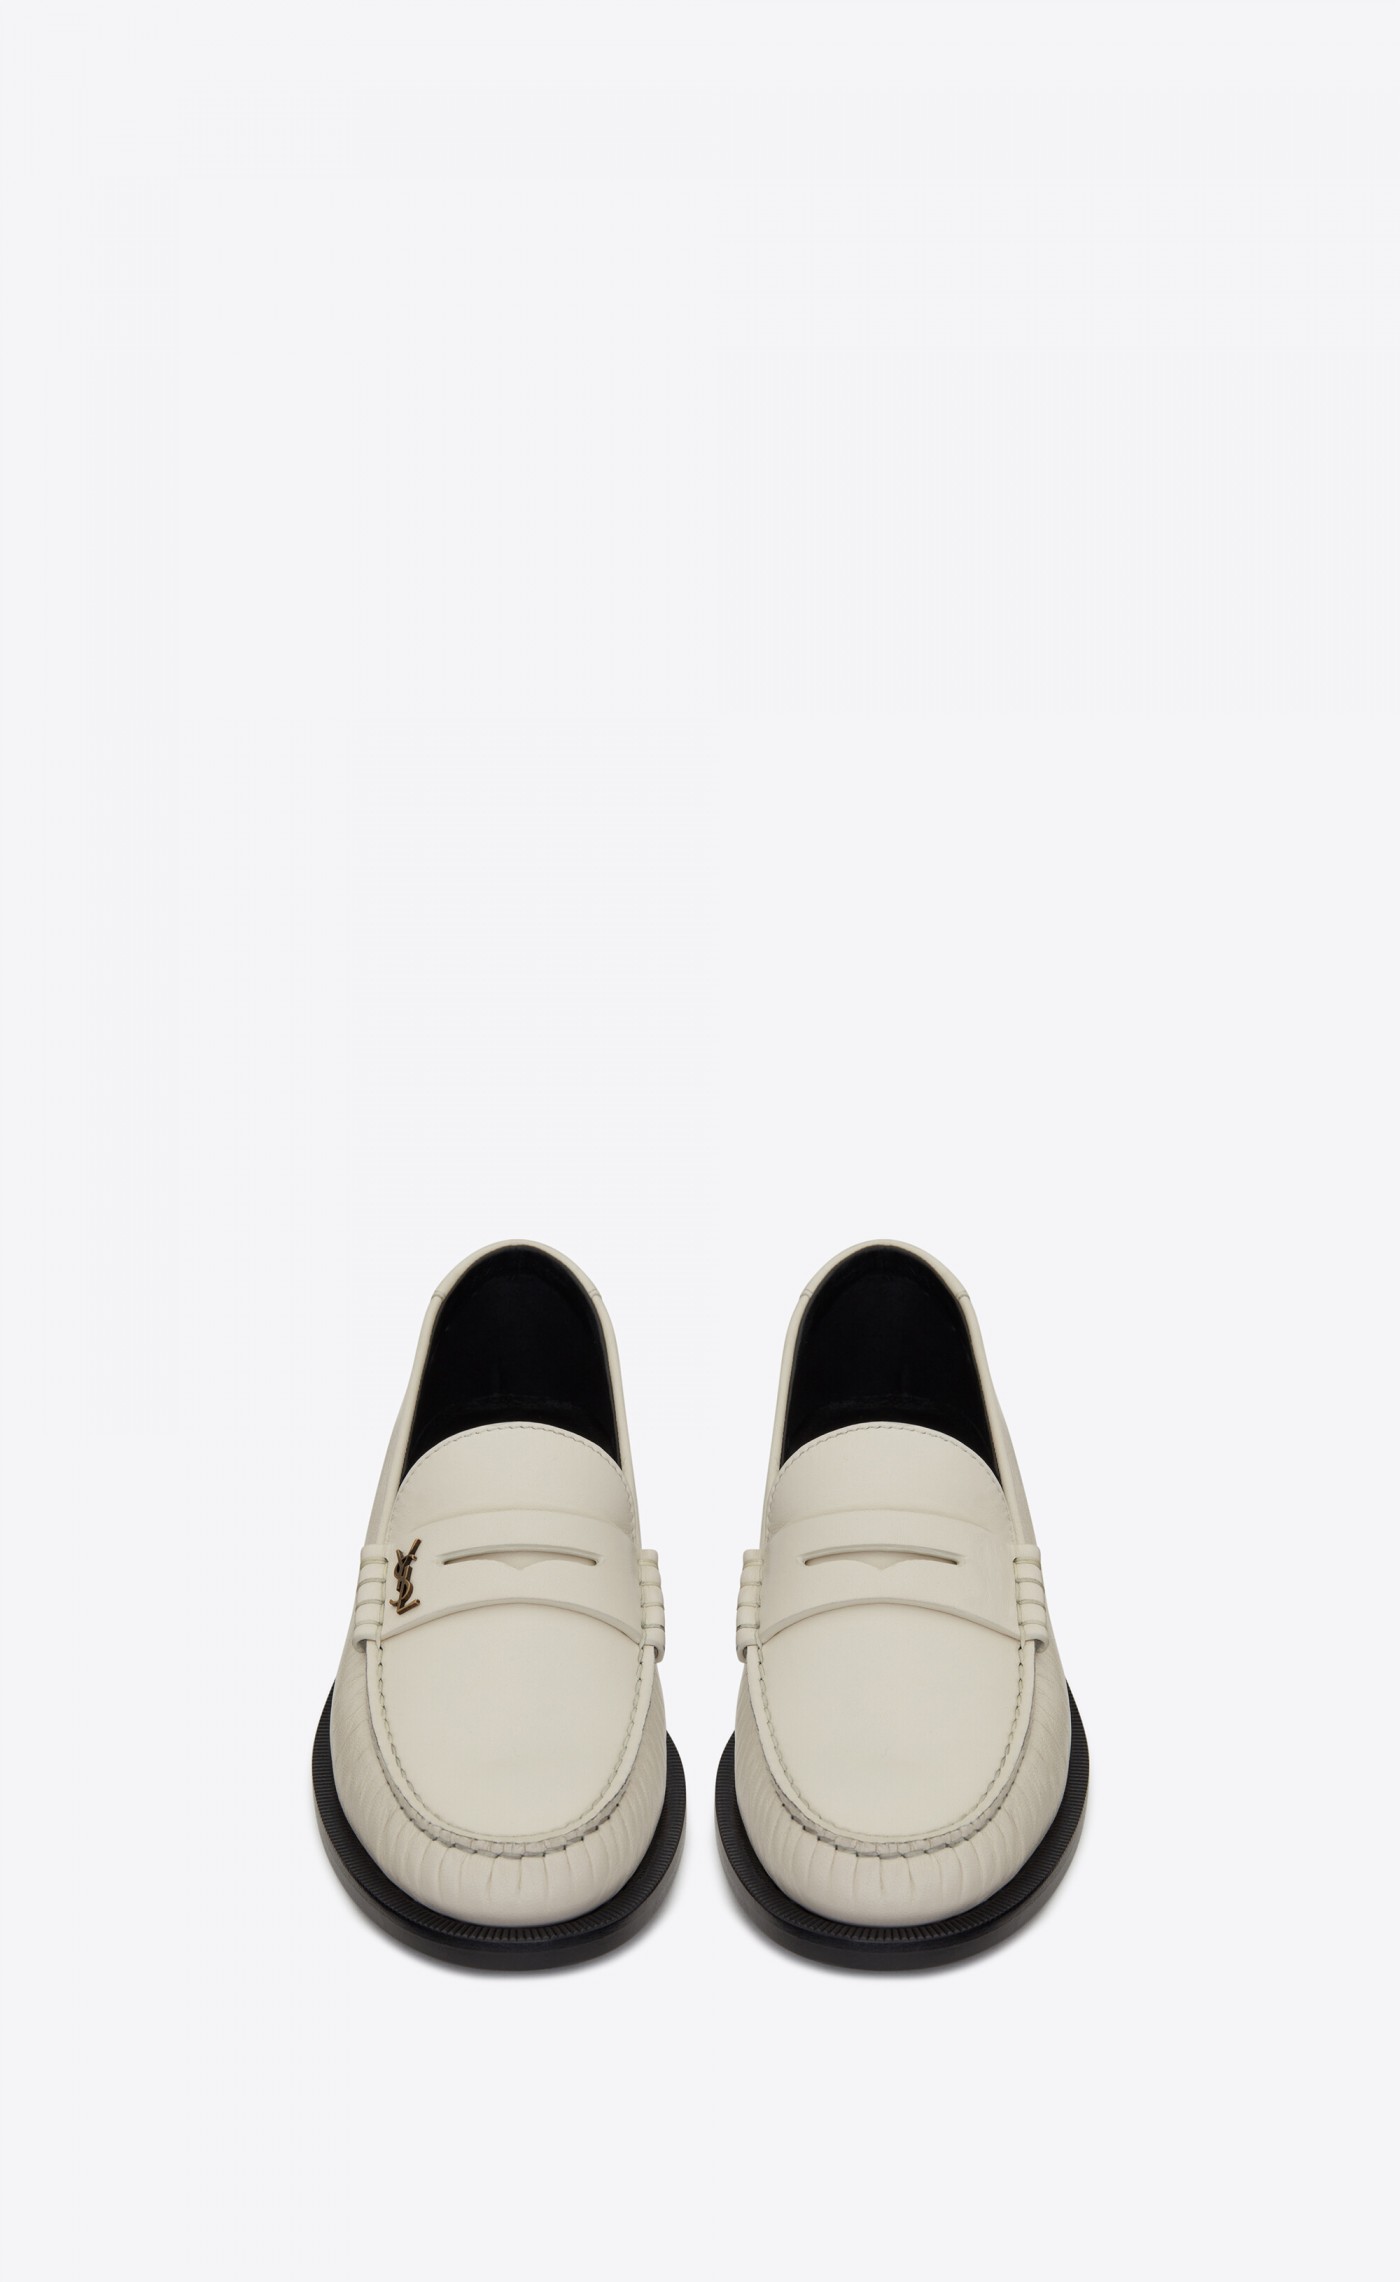 The Loaffer moccasin in smooth pearl leather